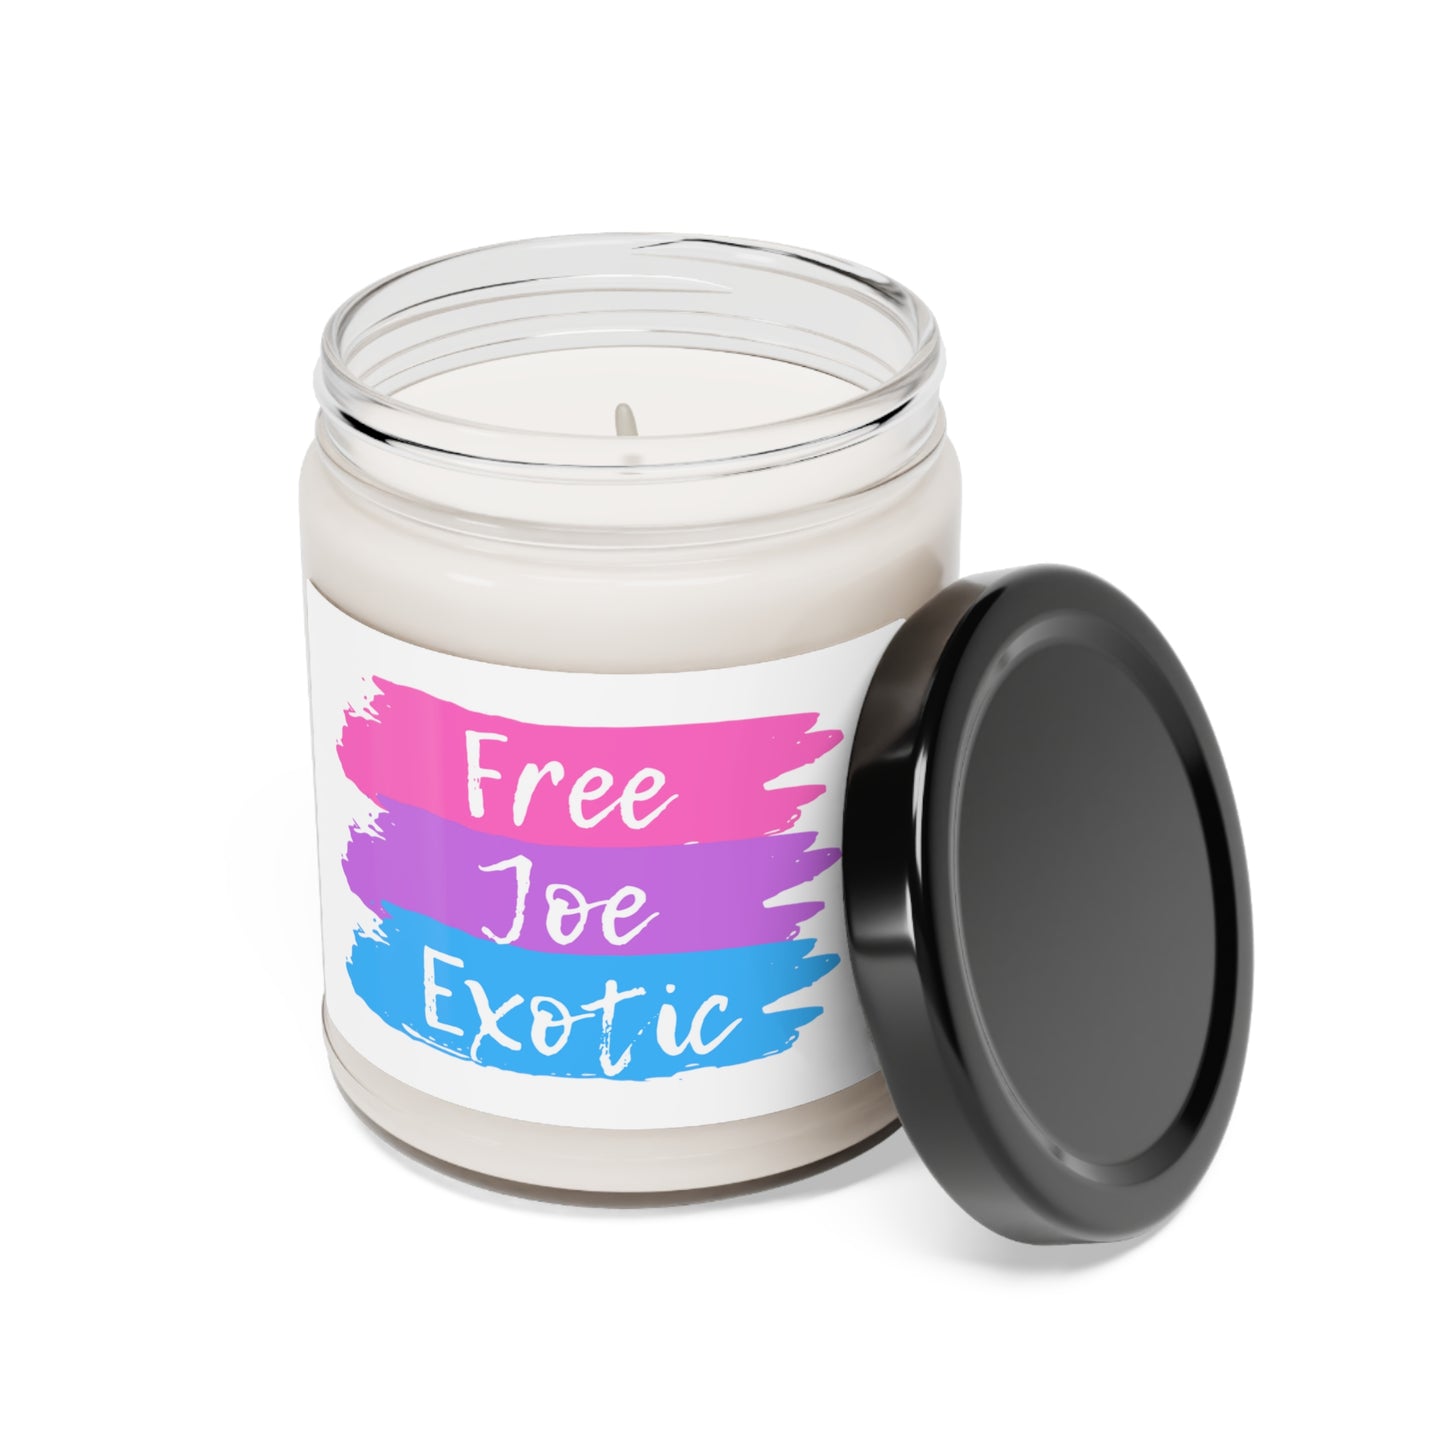 Free Joe Exotic Aromatherapy Candle – Scented Stripes Collection